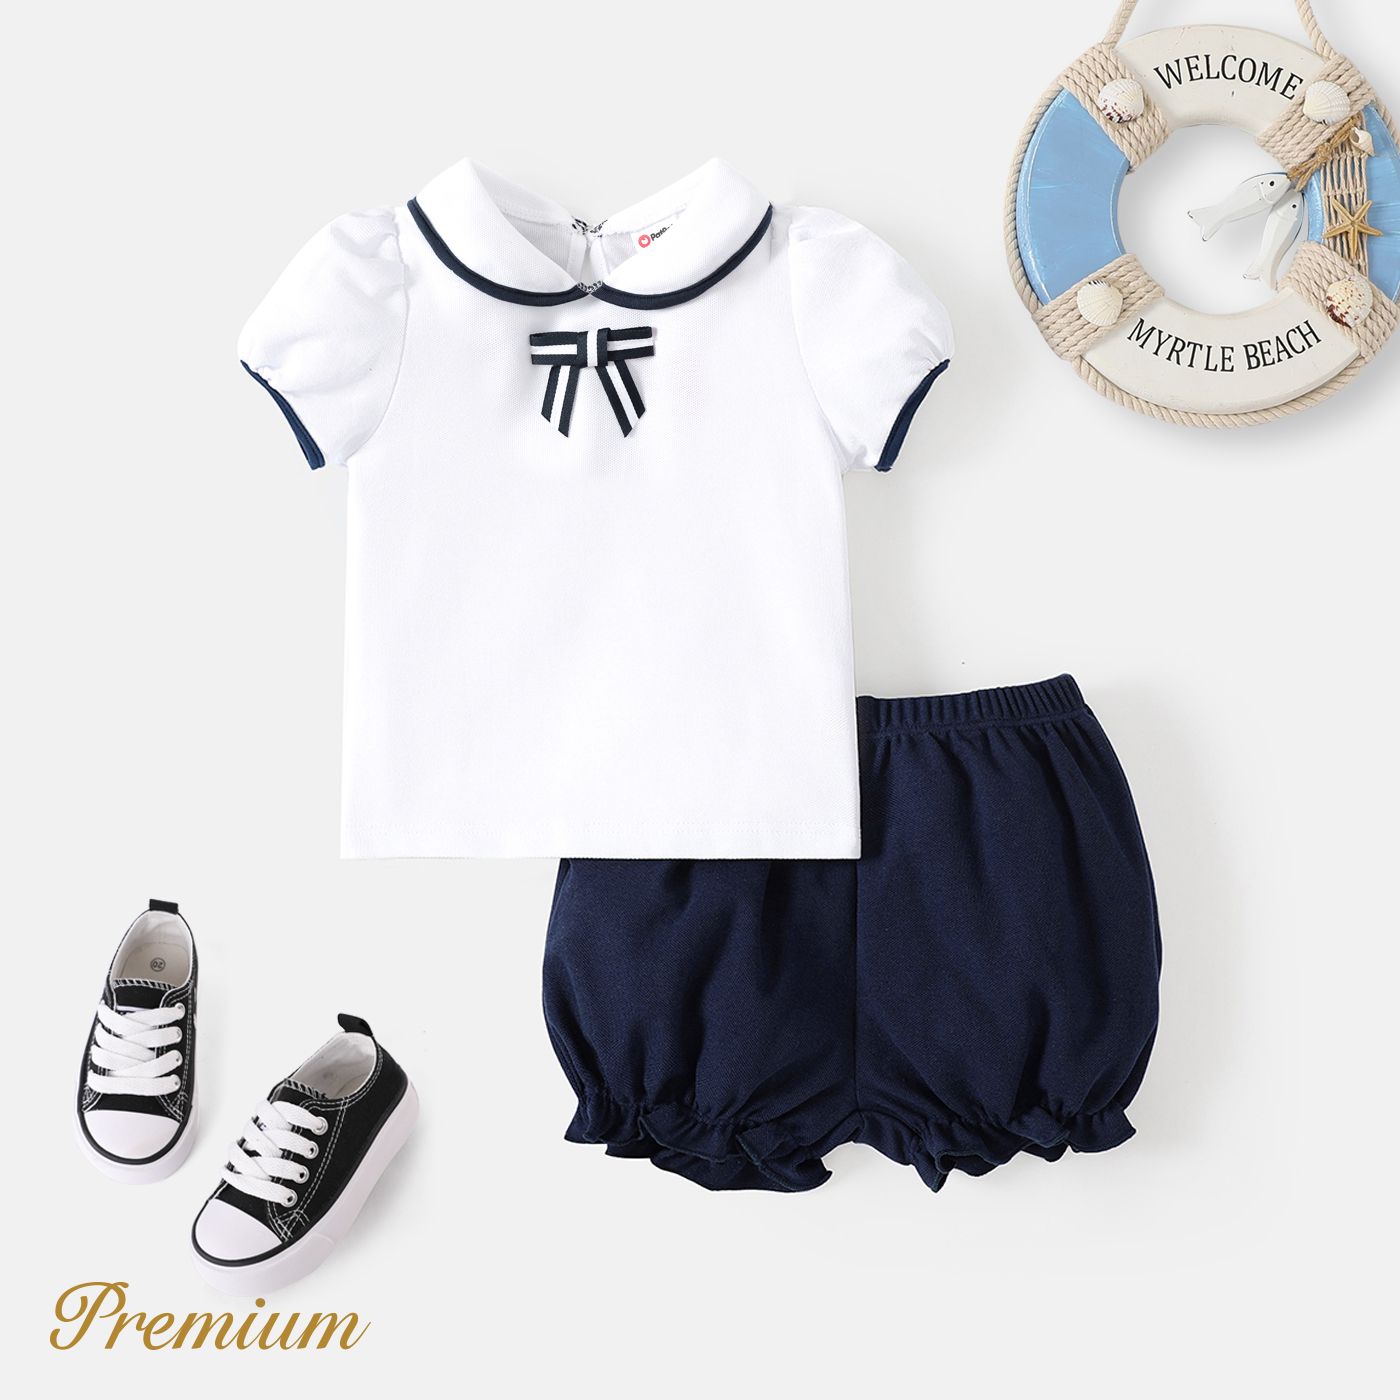 <Sailor's Delight> 2pcs Baby Girl Top And Shorts Set